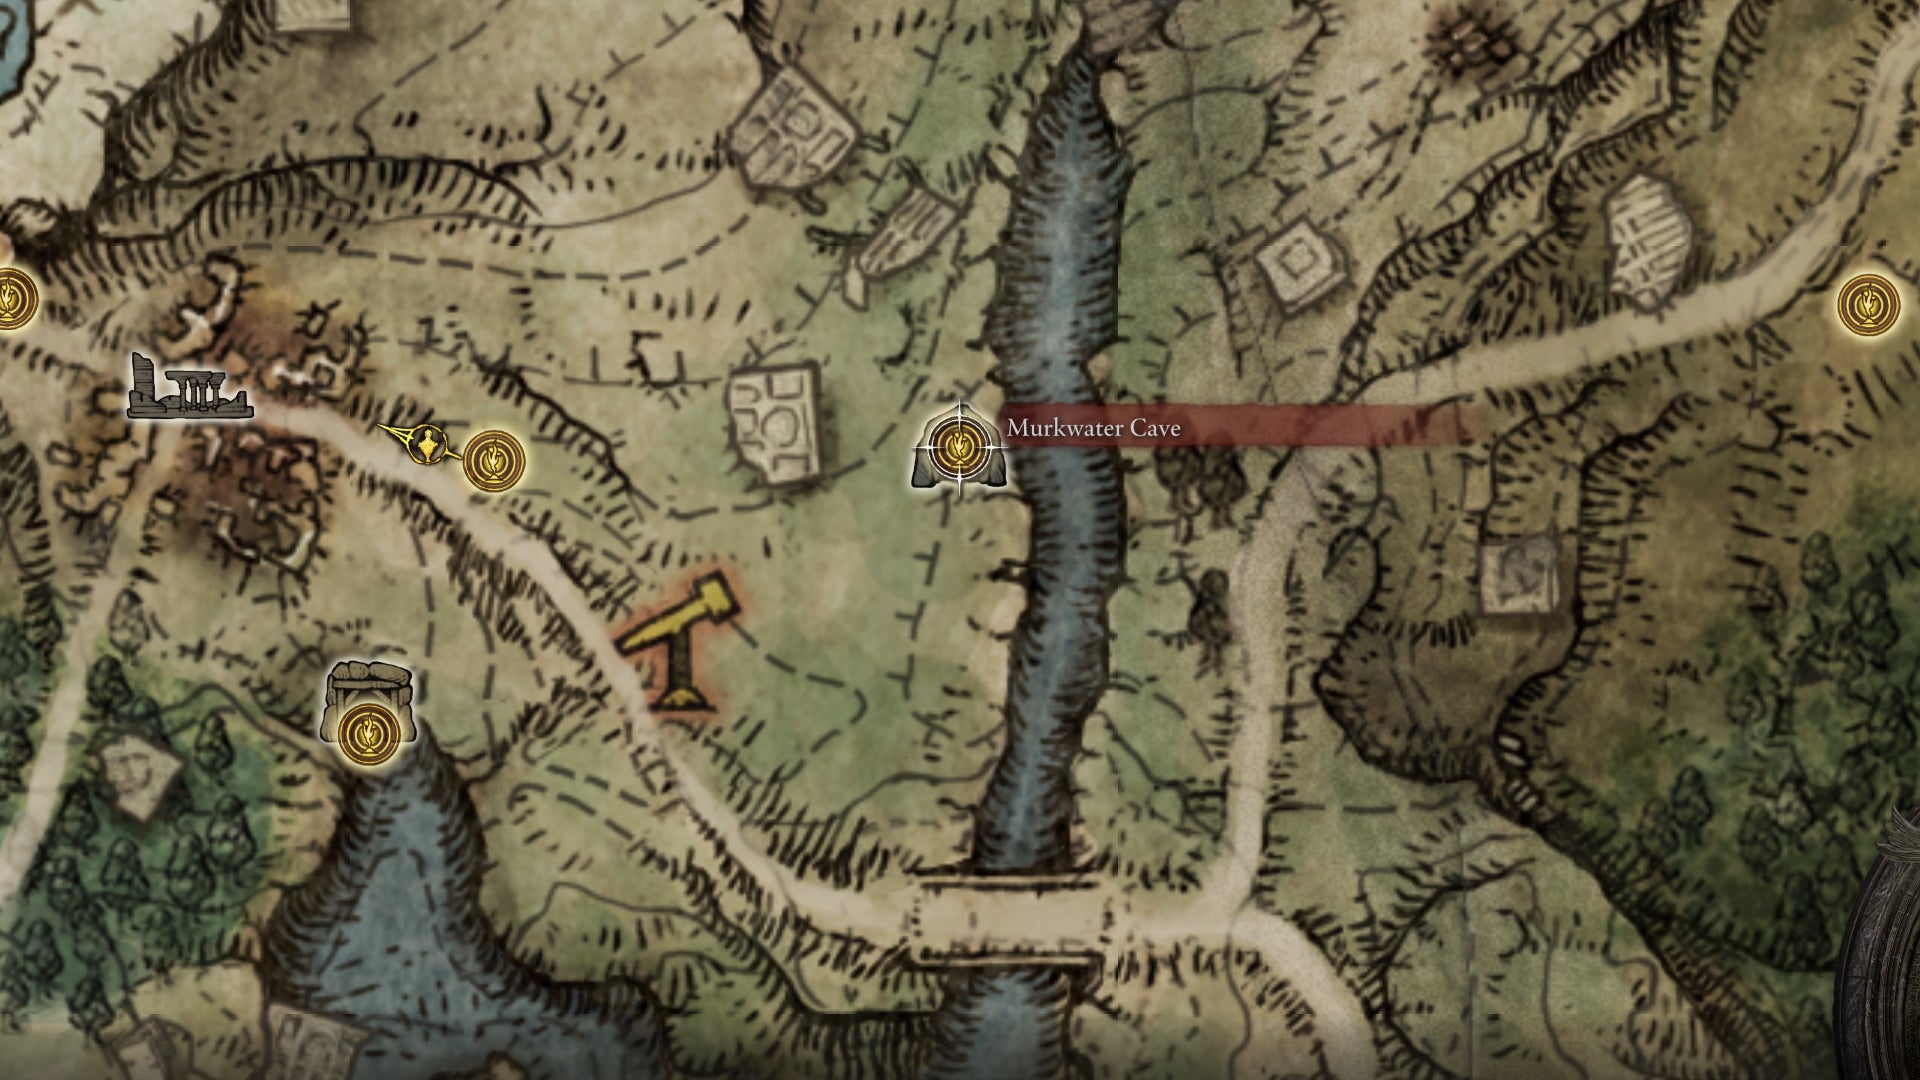 Part of the Elden Ring map, with the location of Murkwater Cave marked.